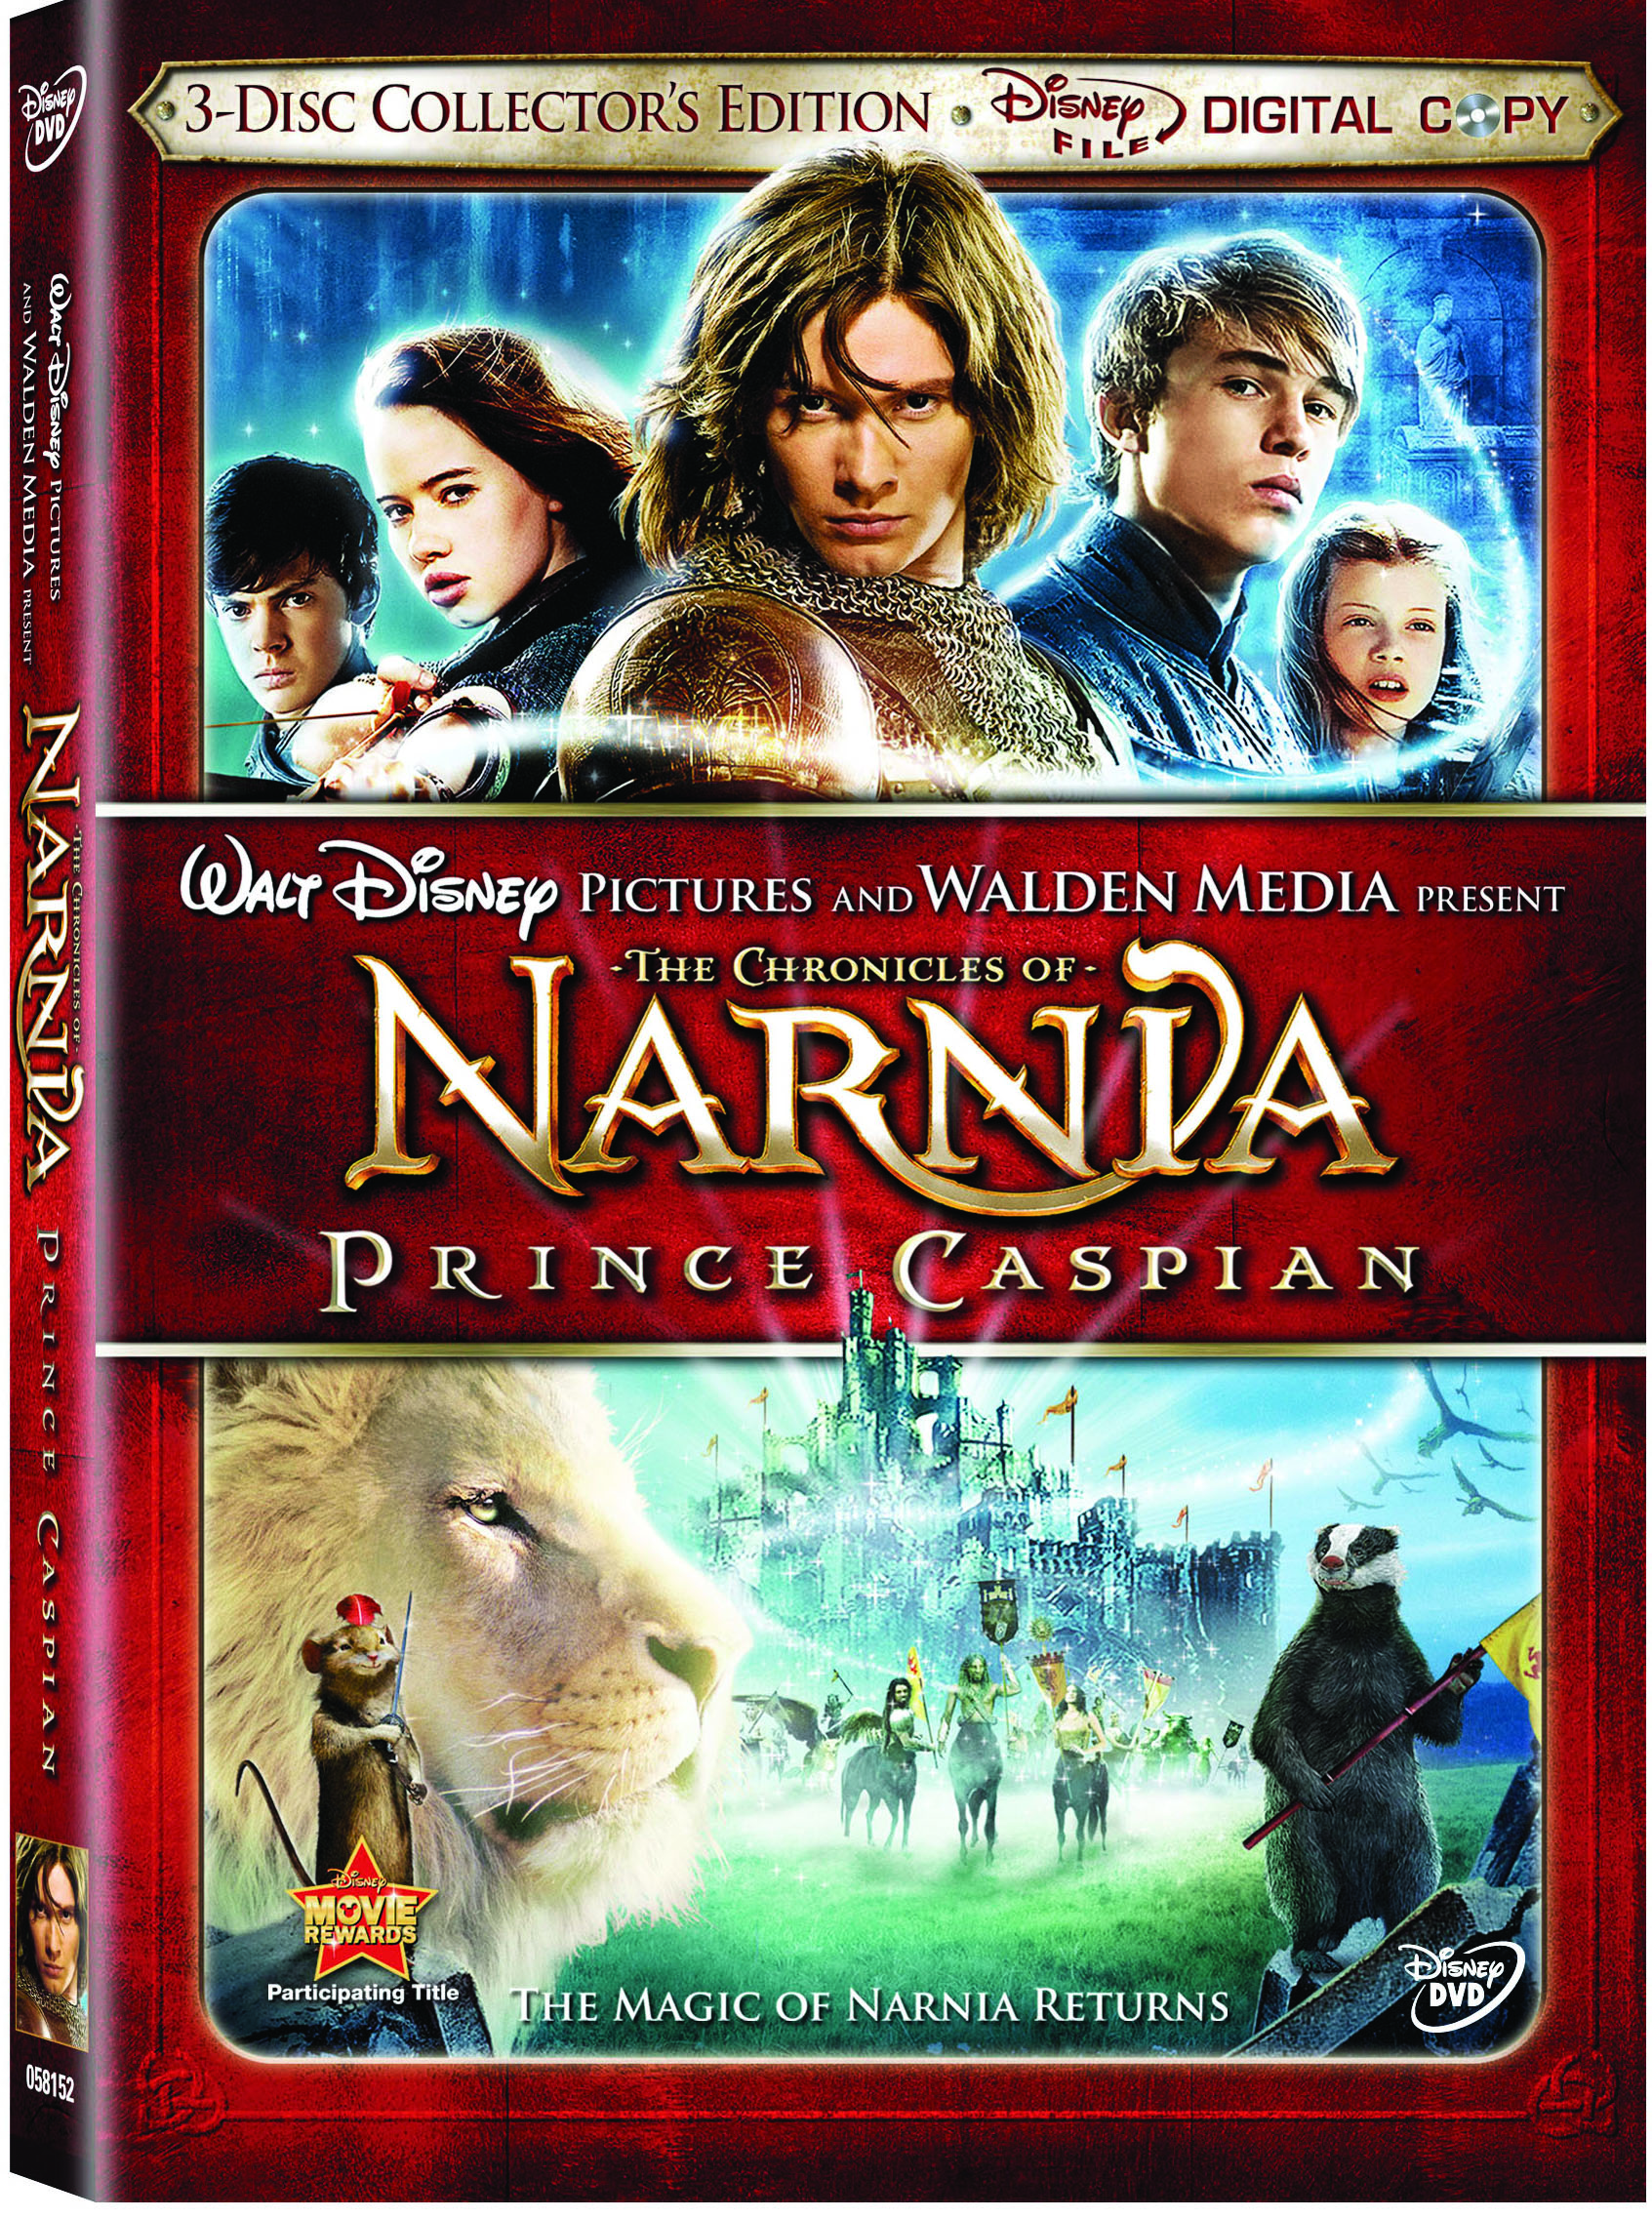 Prince Caspian Blu-ray and DVD release: Dec. 2! Official Announcement! - Narnia Fans1693 x 2274